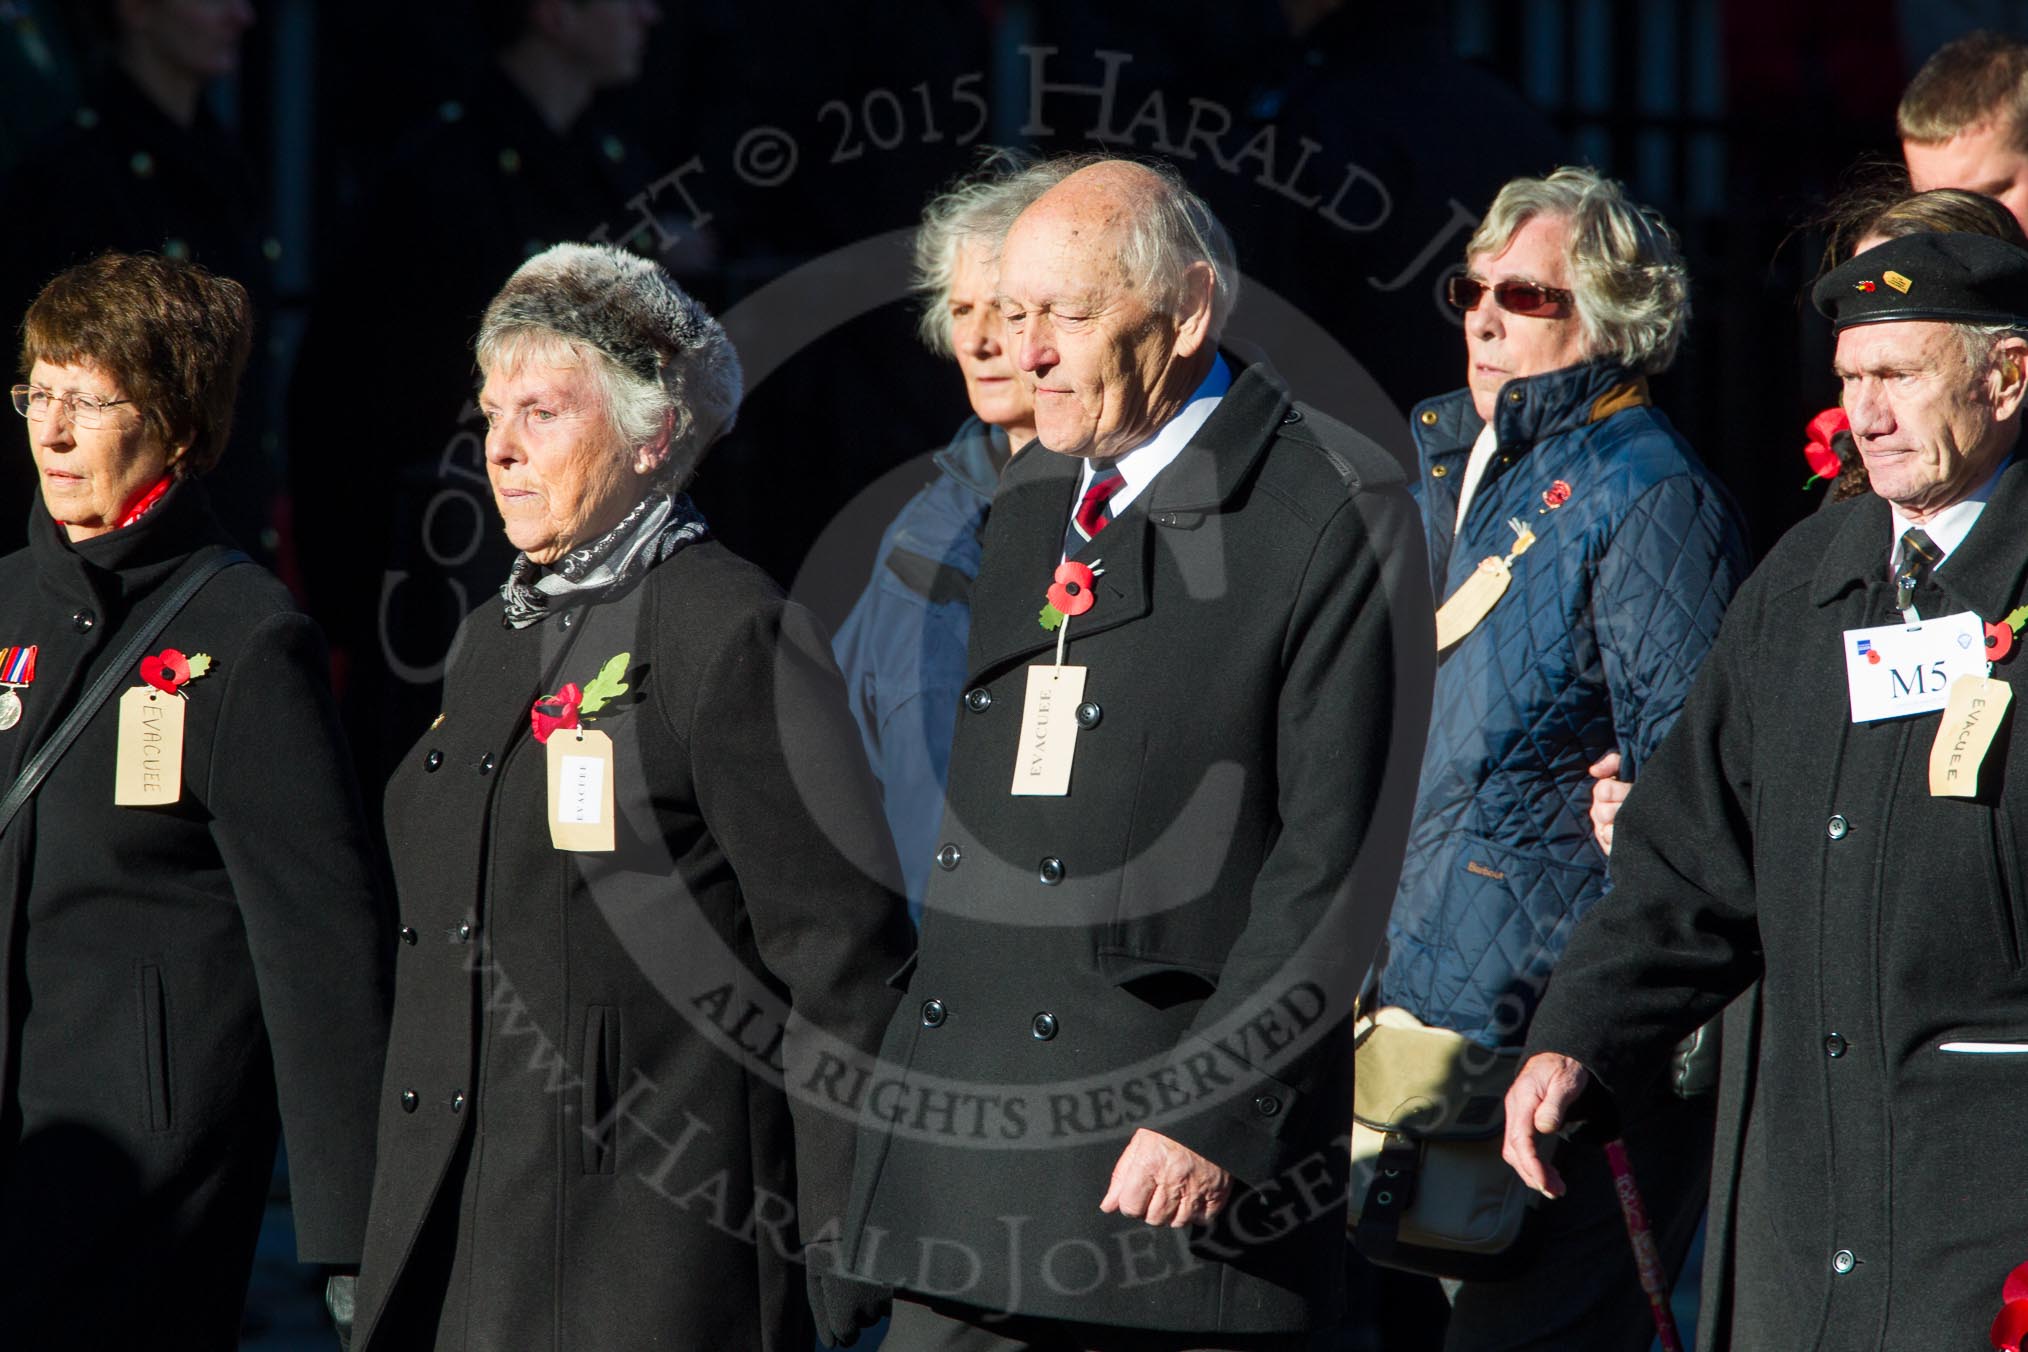 Remembrance Sunday Cenotaph March Past 2013: M5 - Evacuees Reunion Association..
Press stand opposite the Foreign Office building, Whitehall, London SW1,
London,
Greater London,
United Kingdom,
on 10 November 2013 at 12:10, image #1907